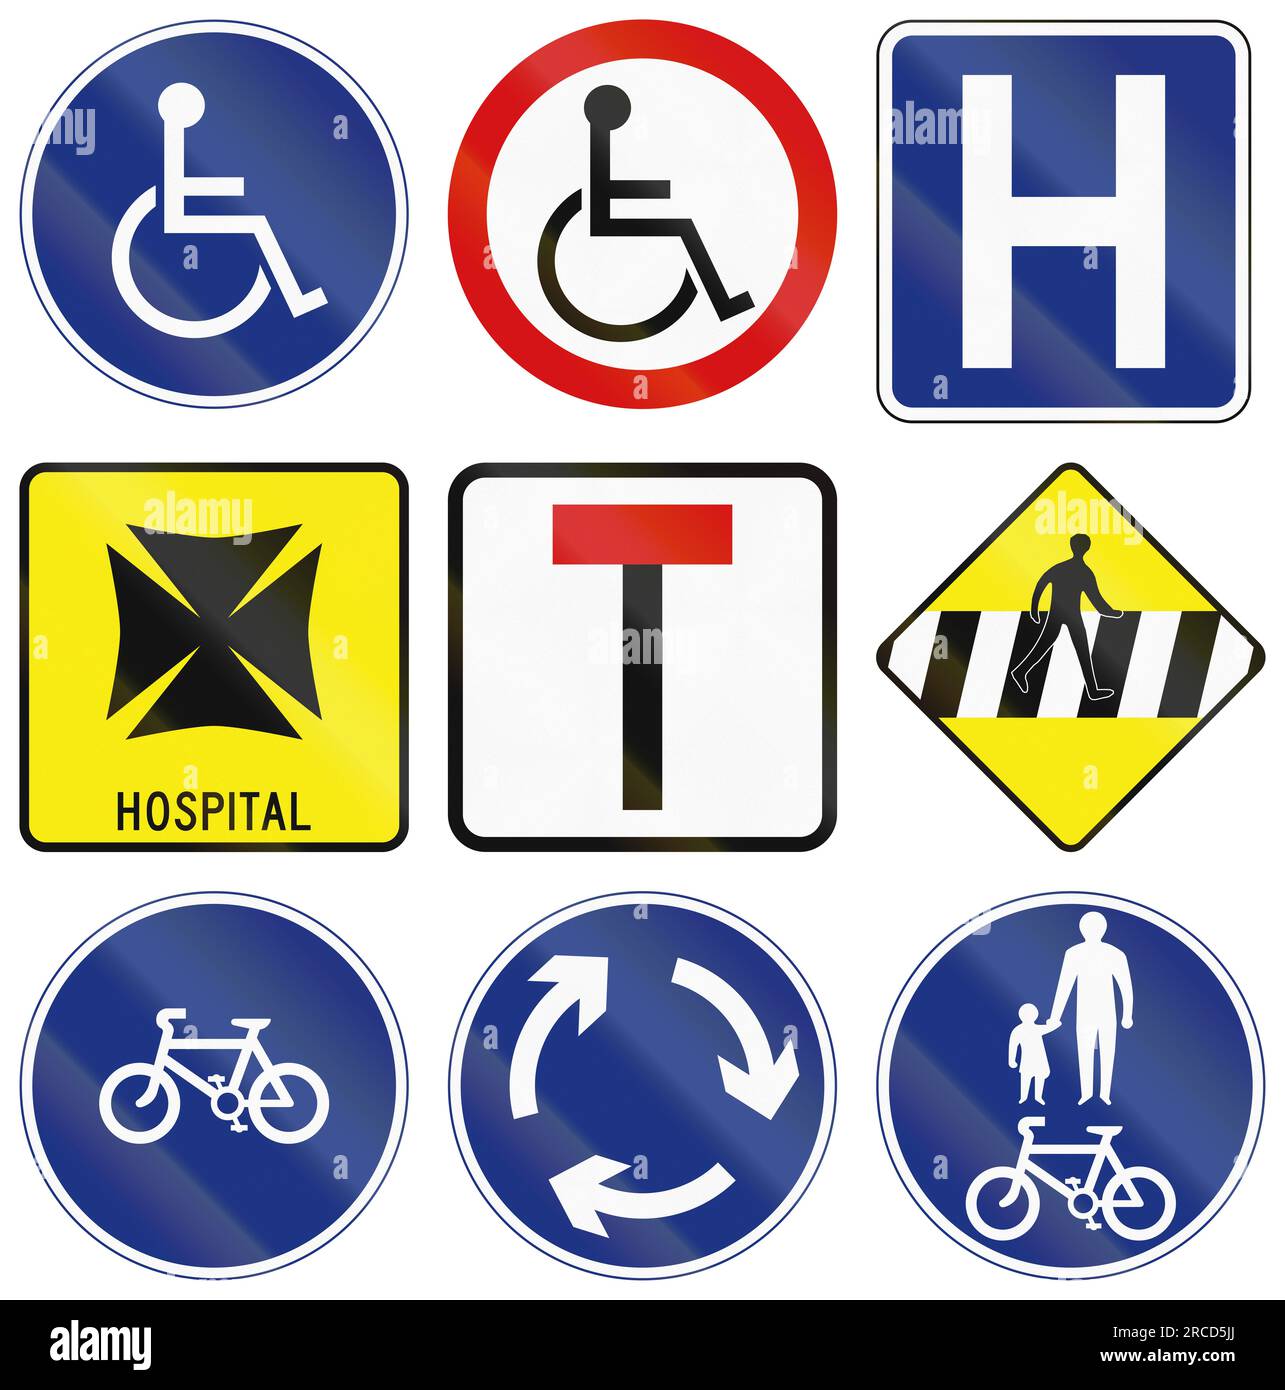 Disabled Parking In Ireland. Stock Photo